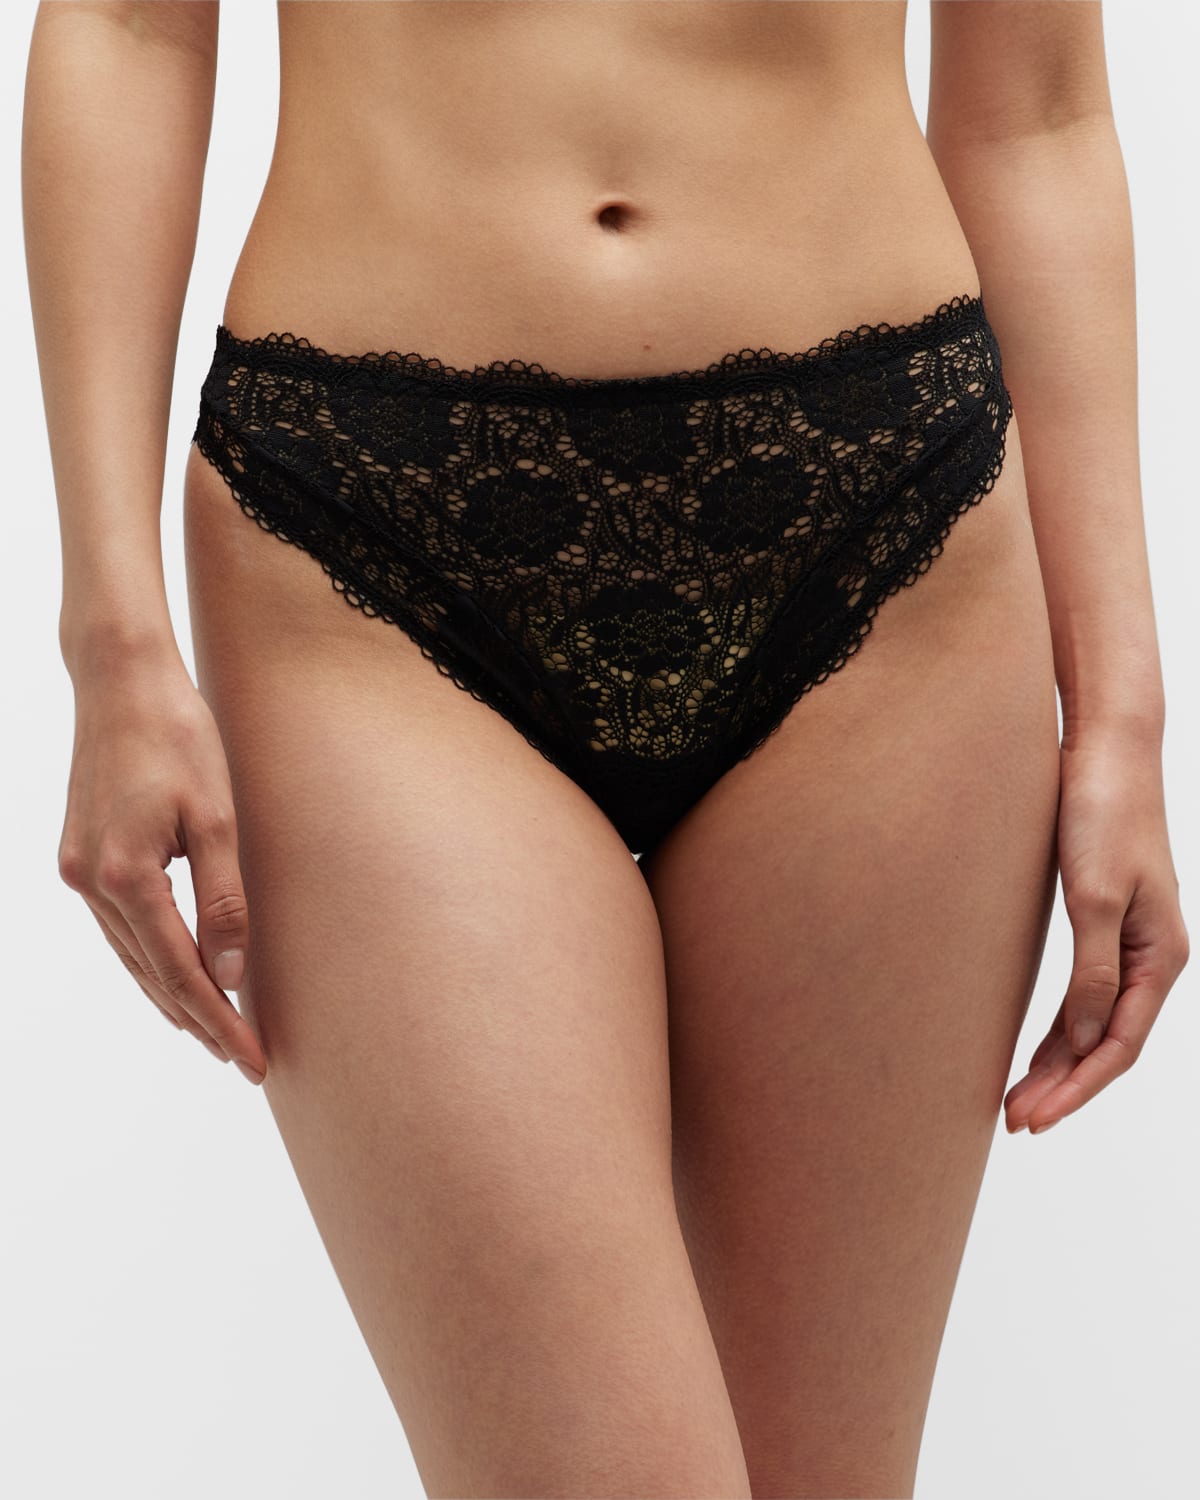 Else Peony Scalloped Floral Lace Thong